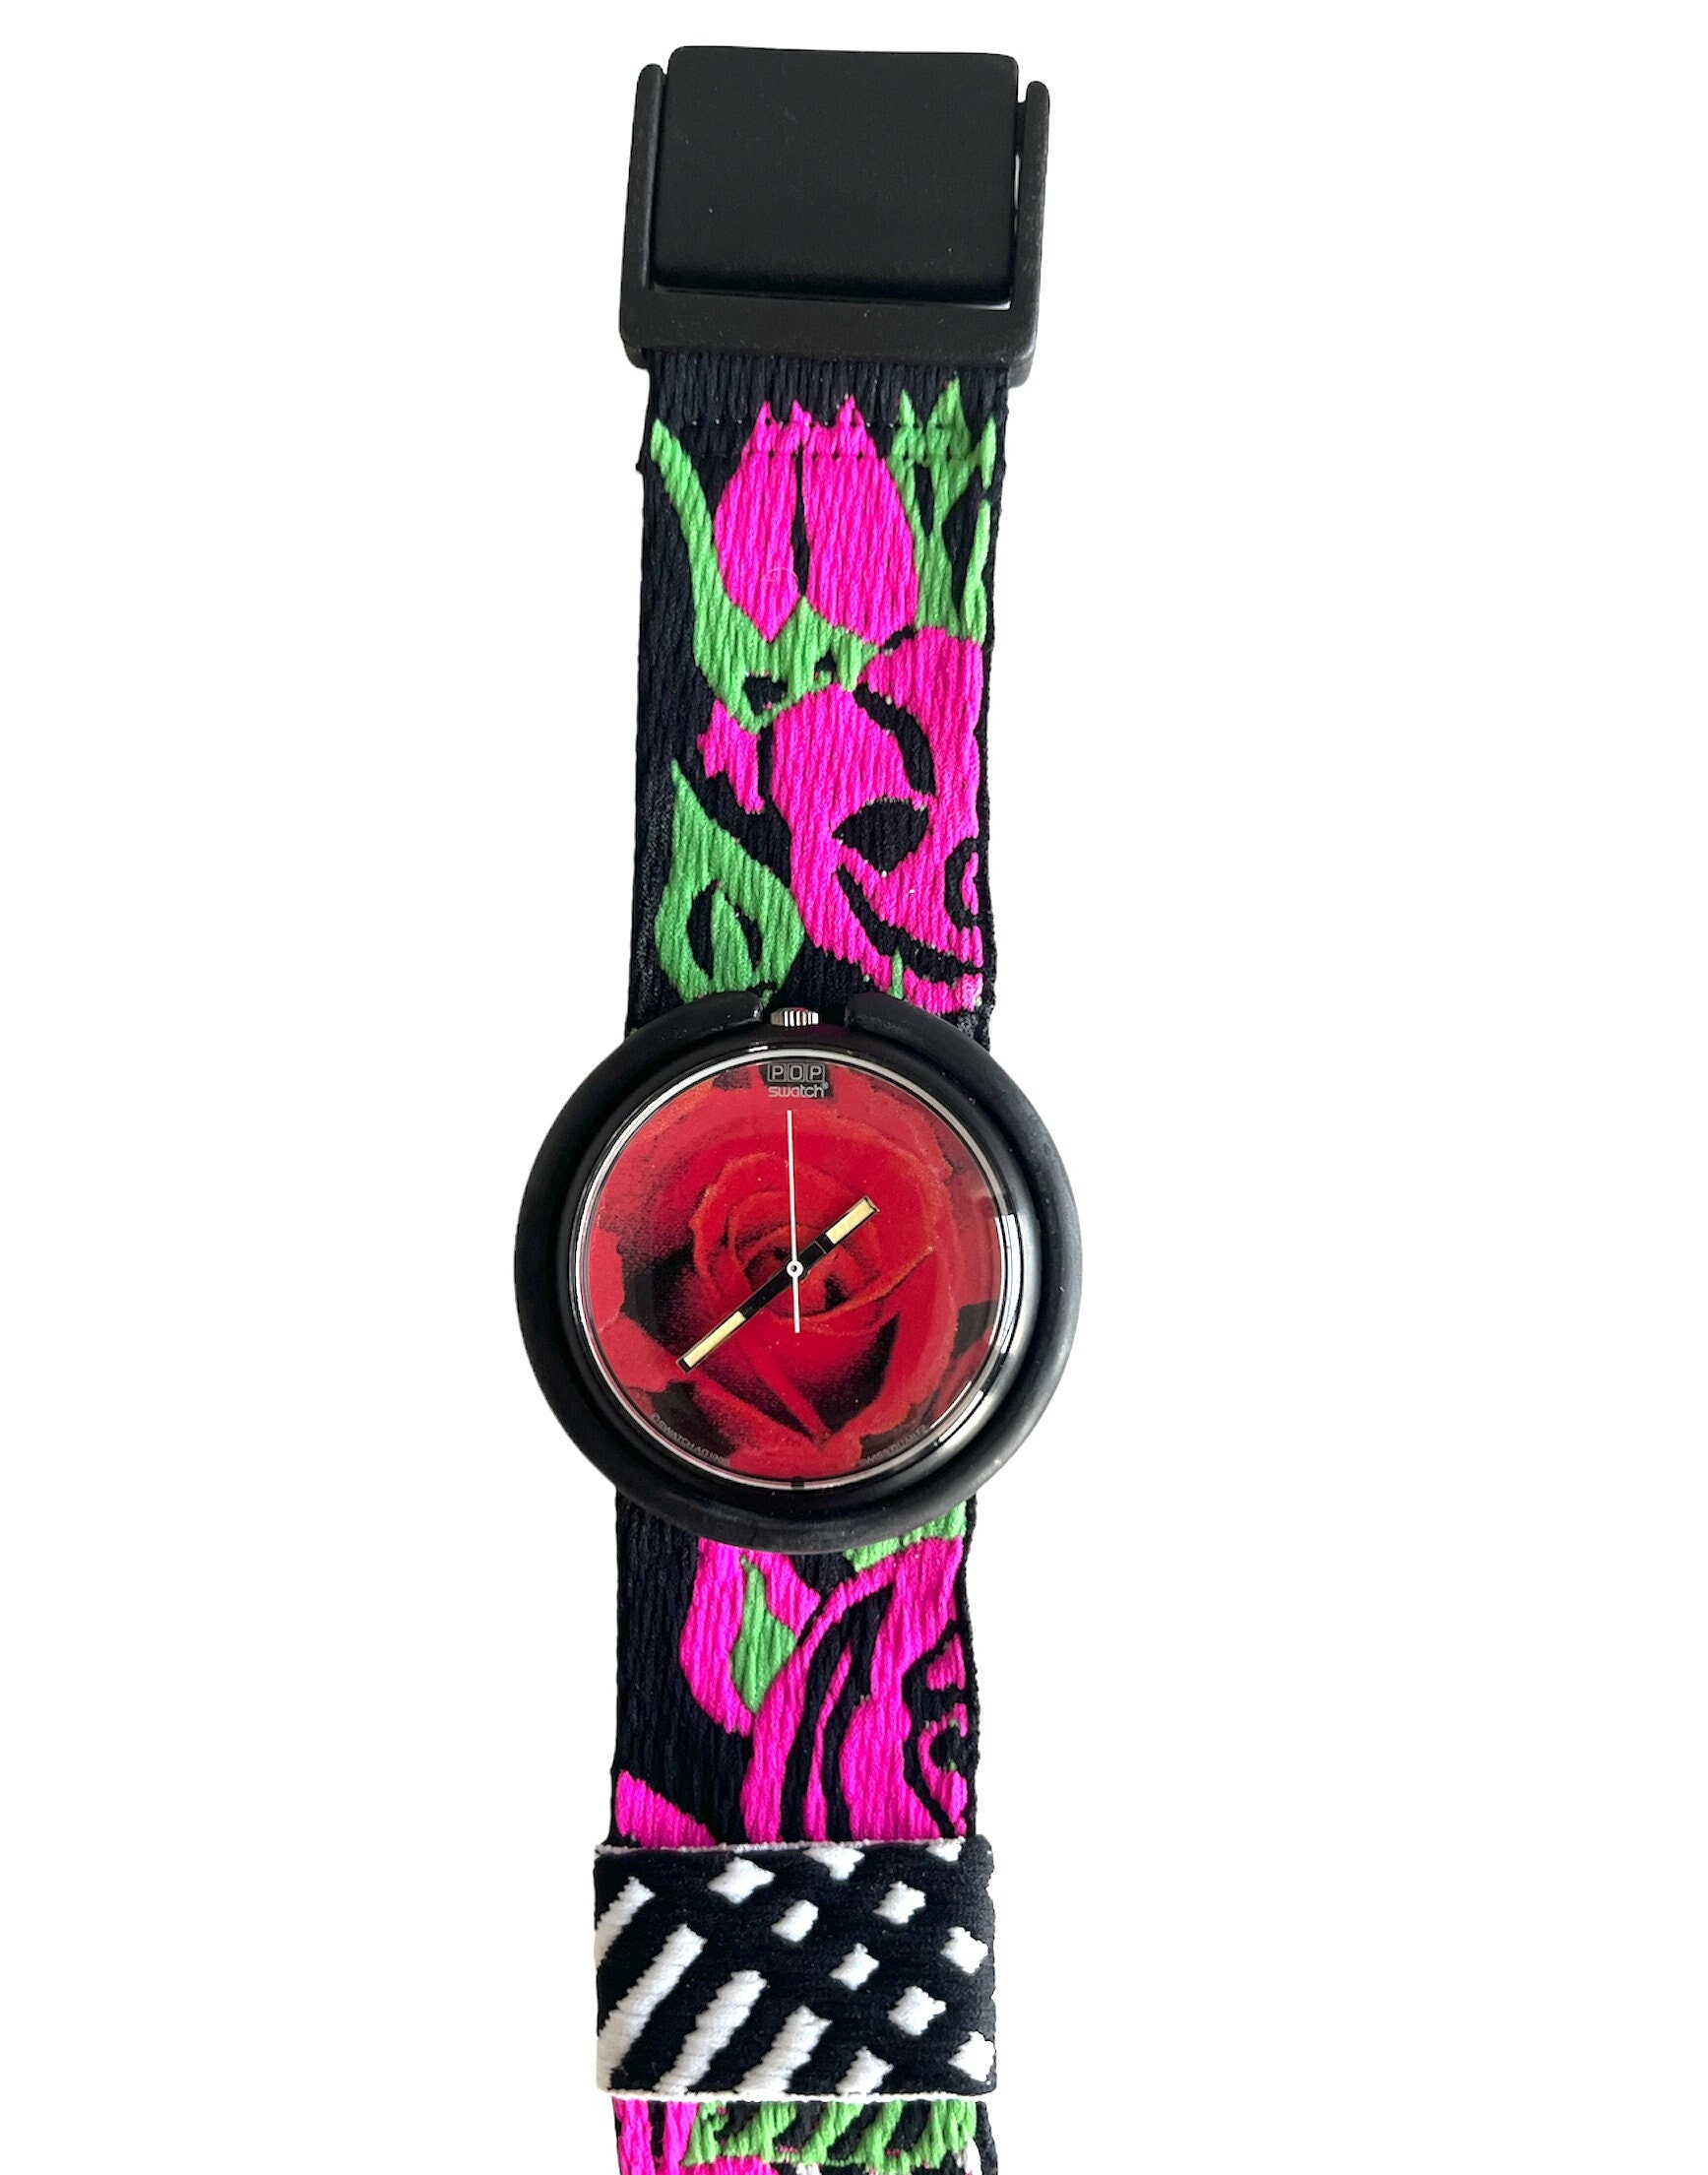 Pop Swatch Roses are Forever 1988 - 腕時計(アナログ)